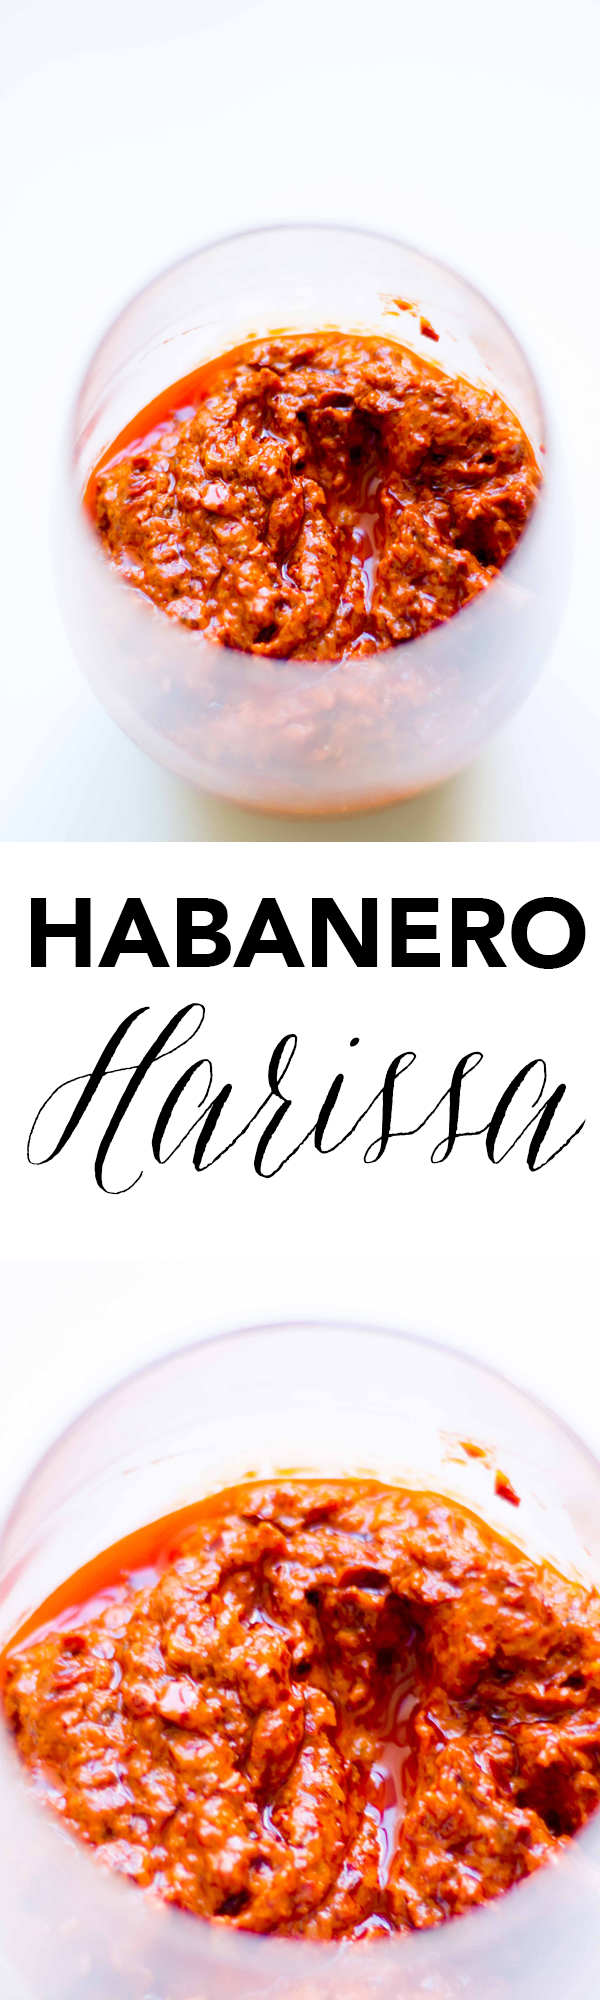 This harissa recipe comes with an even spicier twist--habanero peppers! Try at your own risk :) | www.seriousspice.com